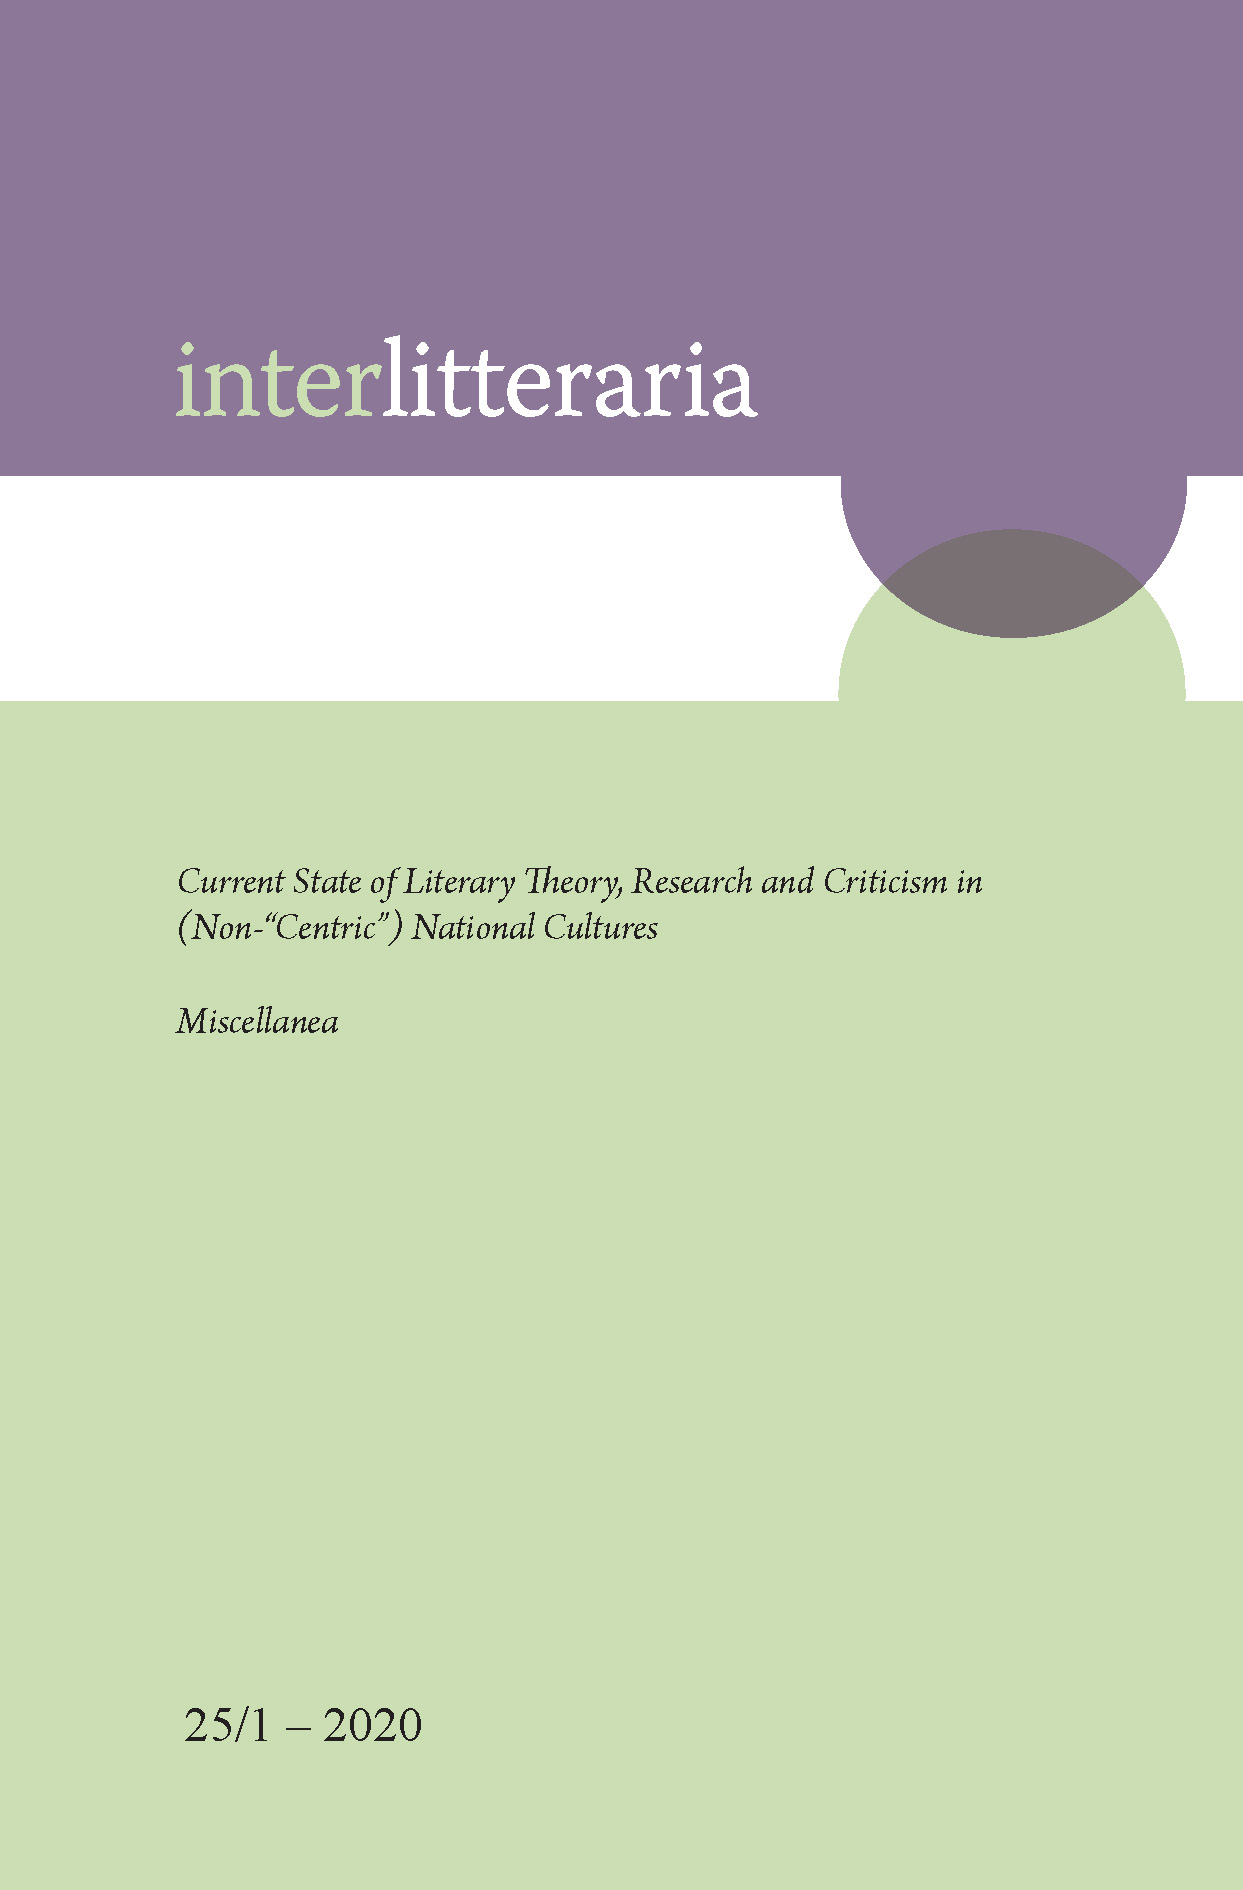 					View Vol. 25 No. 1 (2020): Current State of Literary Theory, Research and Criticism in (Non-“Centric”) National Cultures. Miscellanea
				